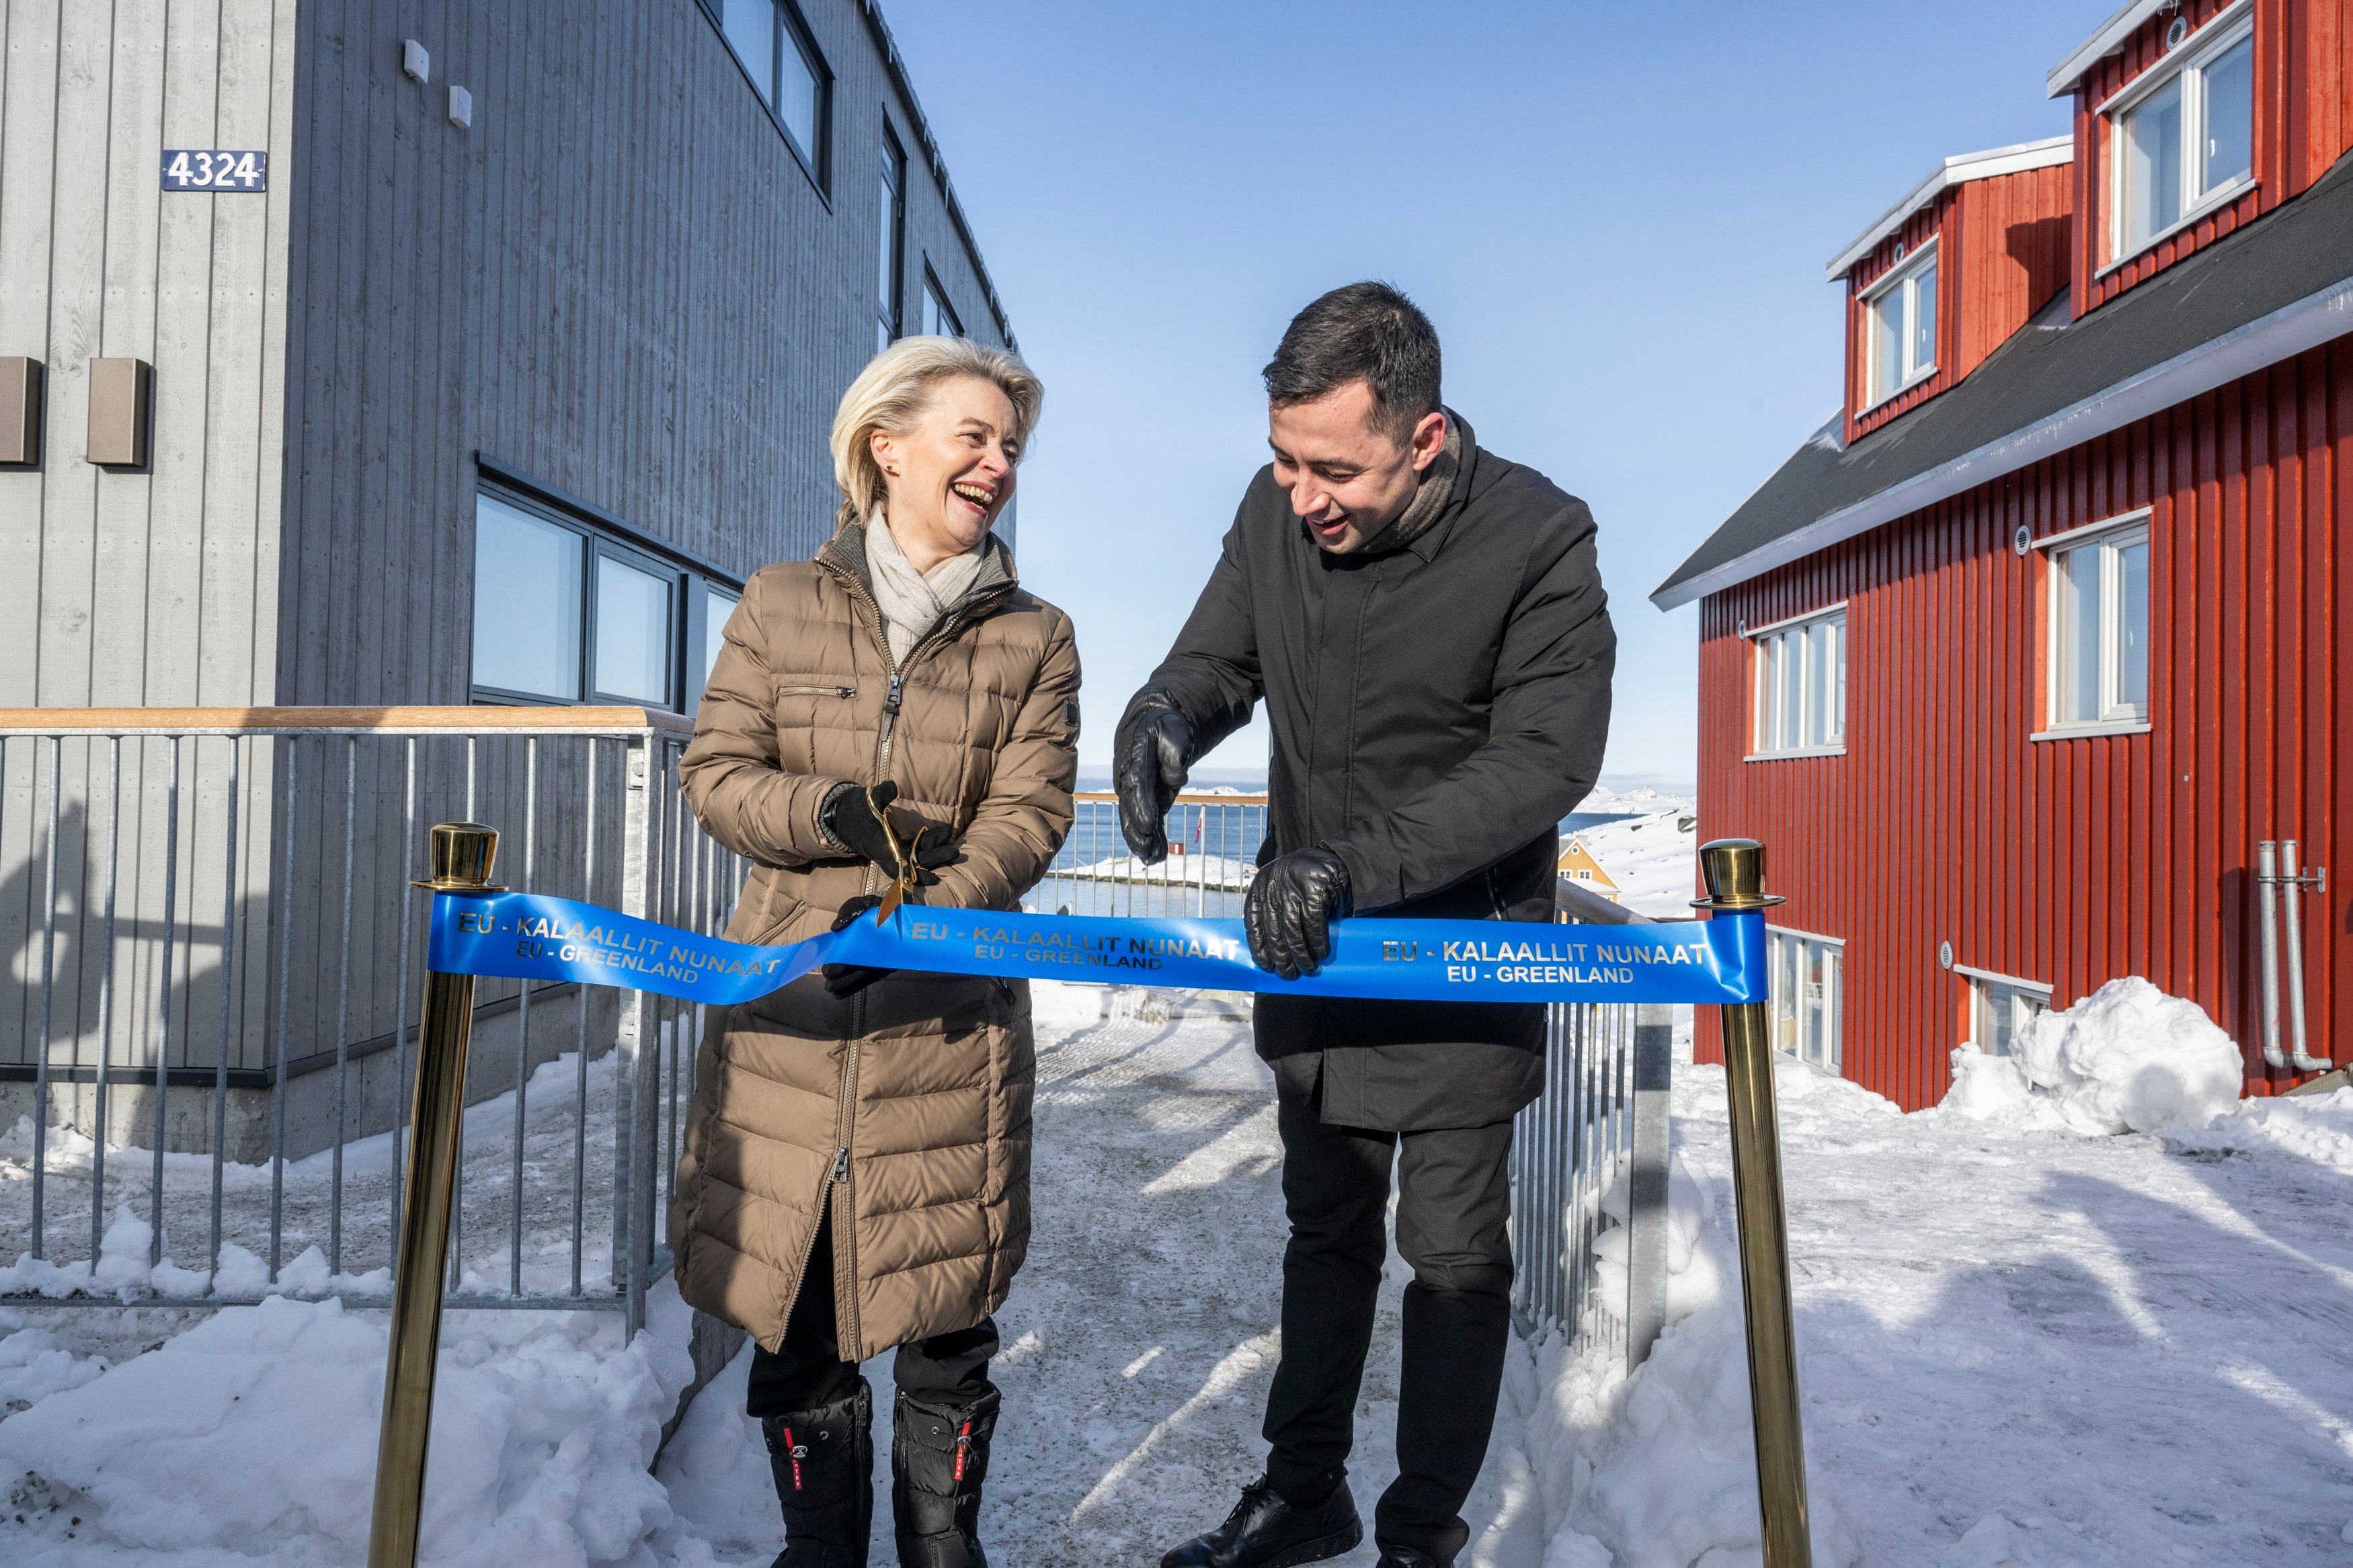 European Commission President Ursula von der Leyen and Greenland’s Prime Minister Mute Bourup Egede cut the ribbon to mark the opening of a new EU office in Nuuk on March 15. The opening of the office is part of the European Union’s Arctic strategy. Photo: EPA-EFE 